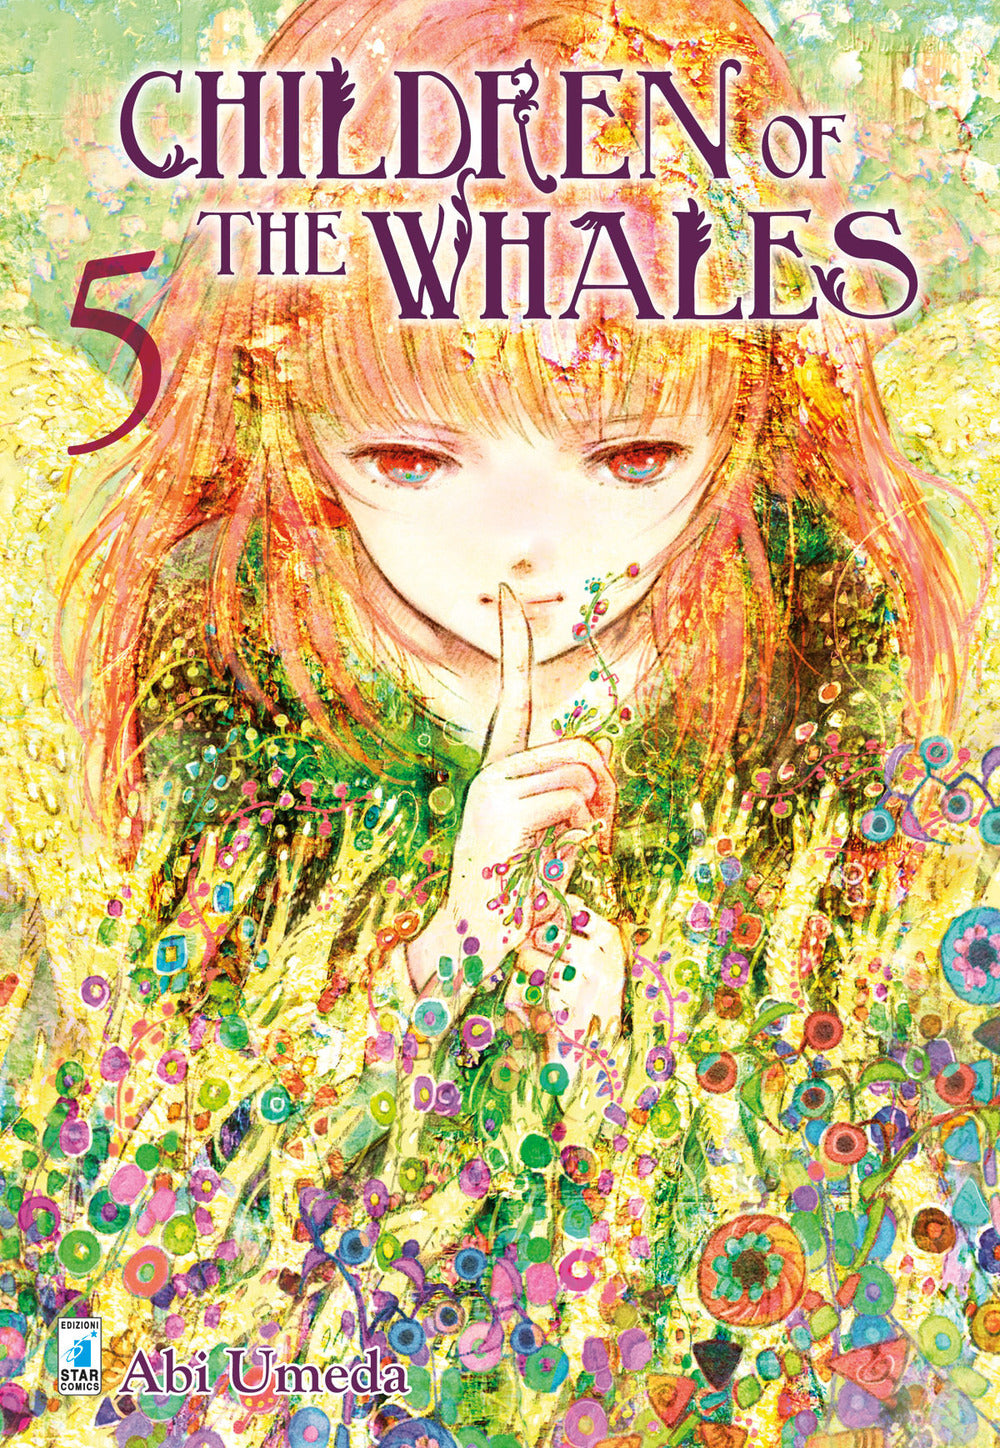 Children of the whales. Vol. 5.